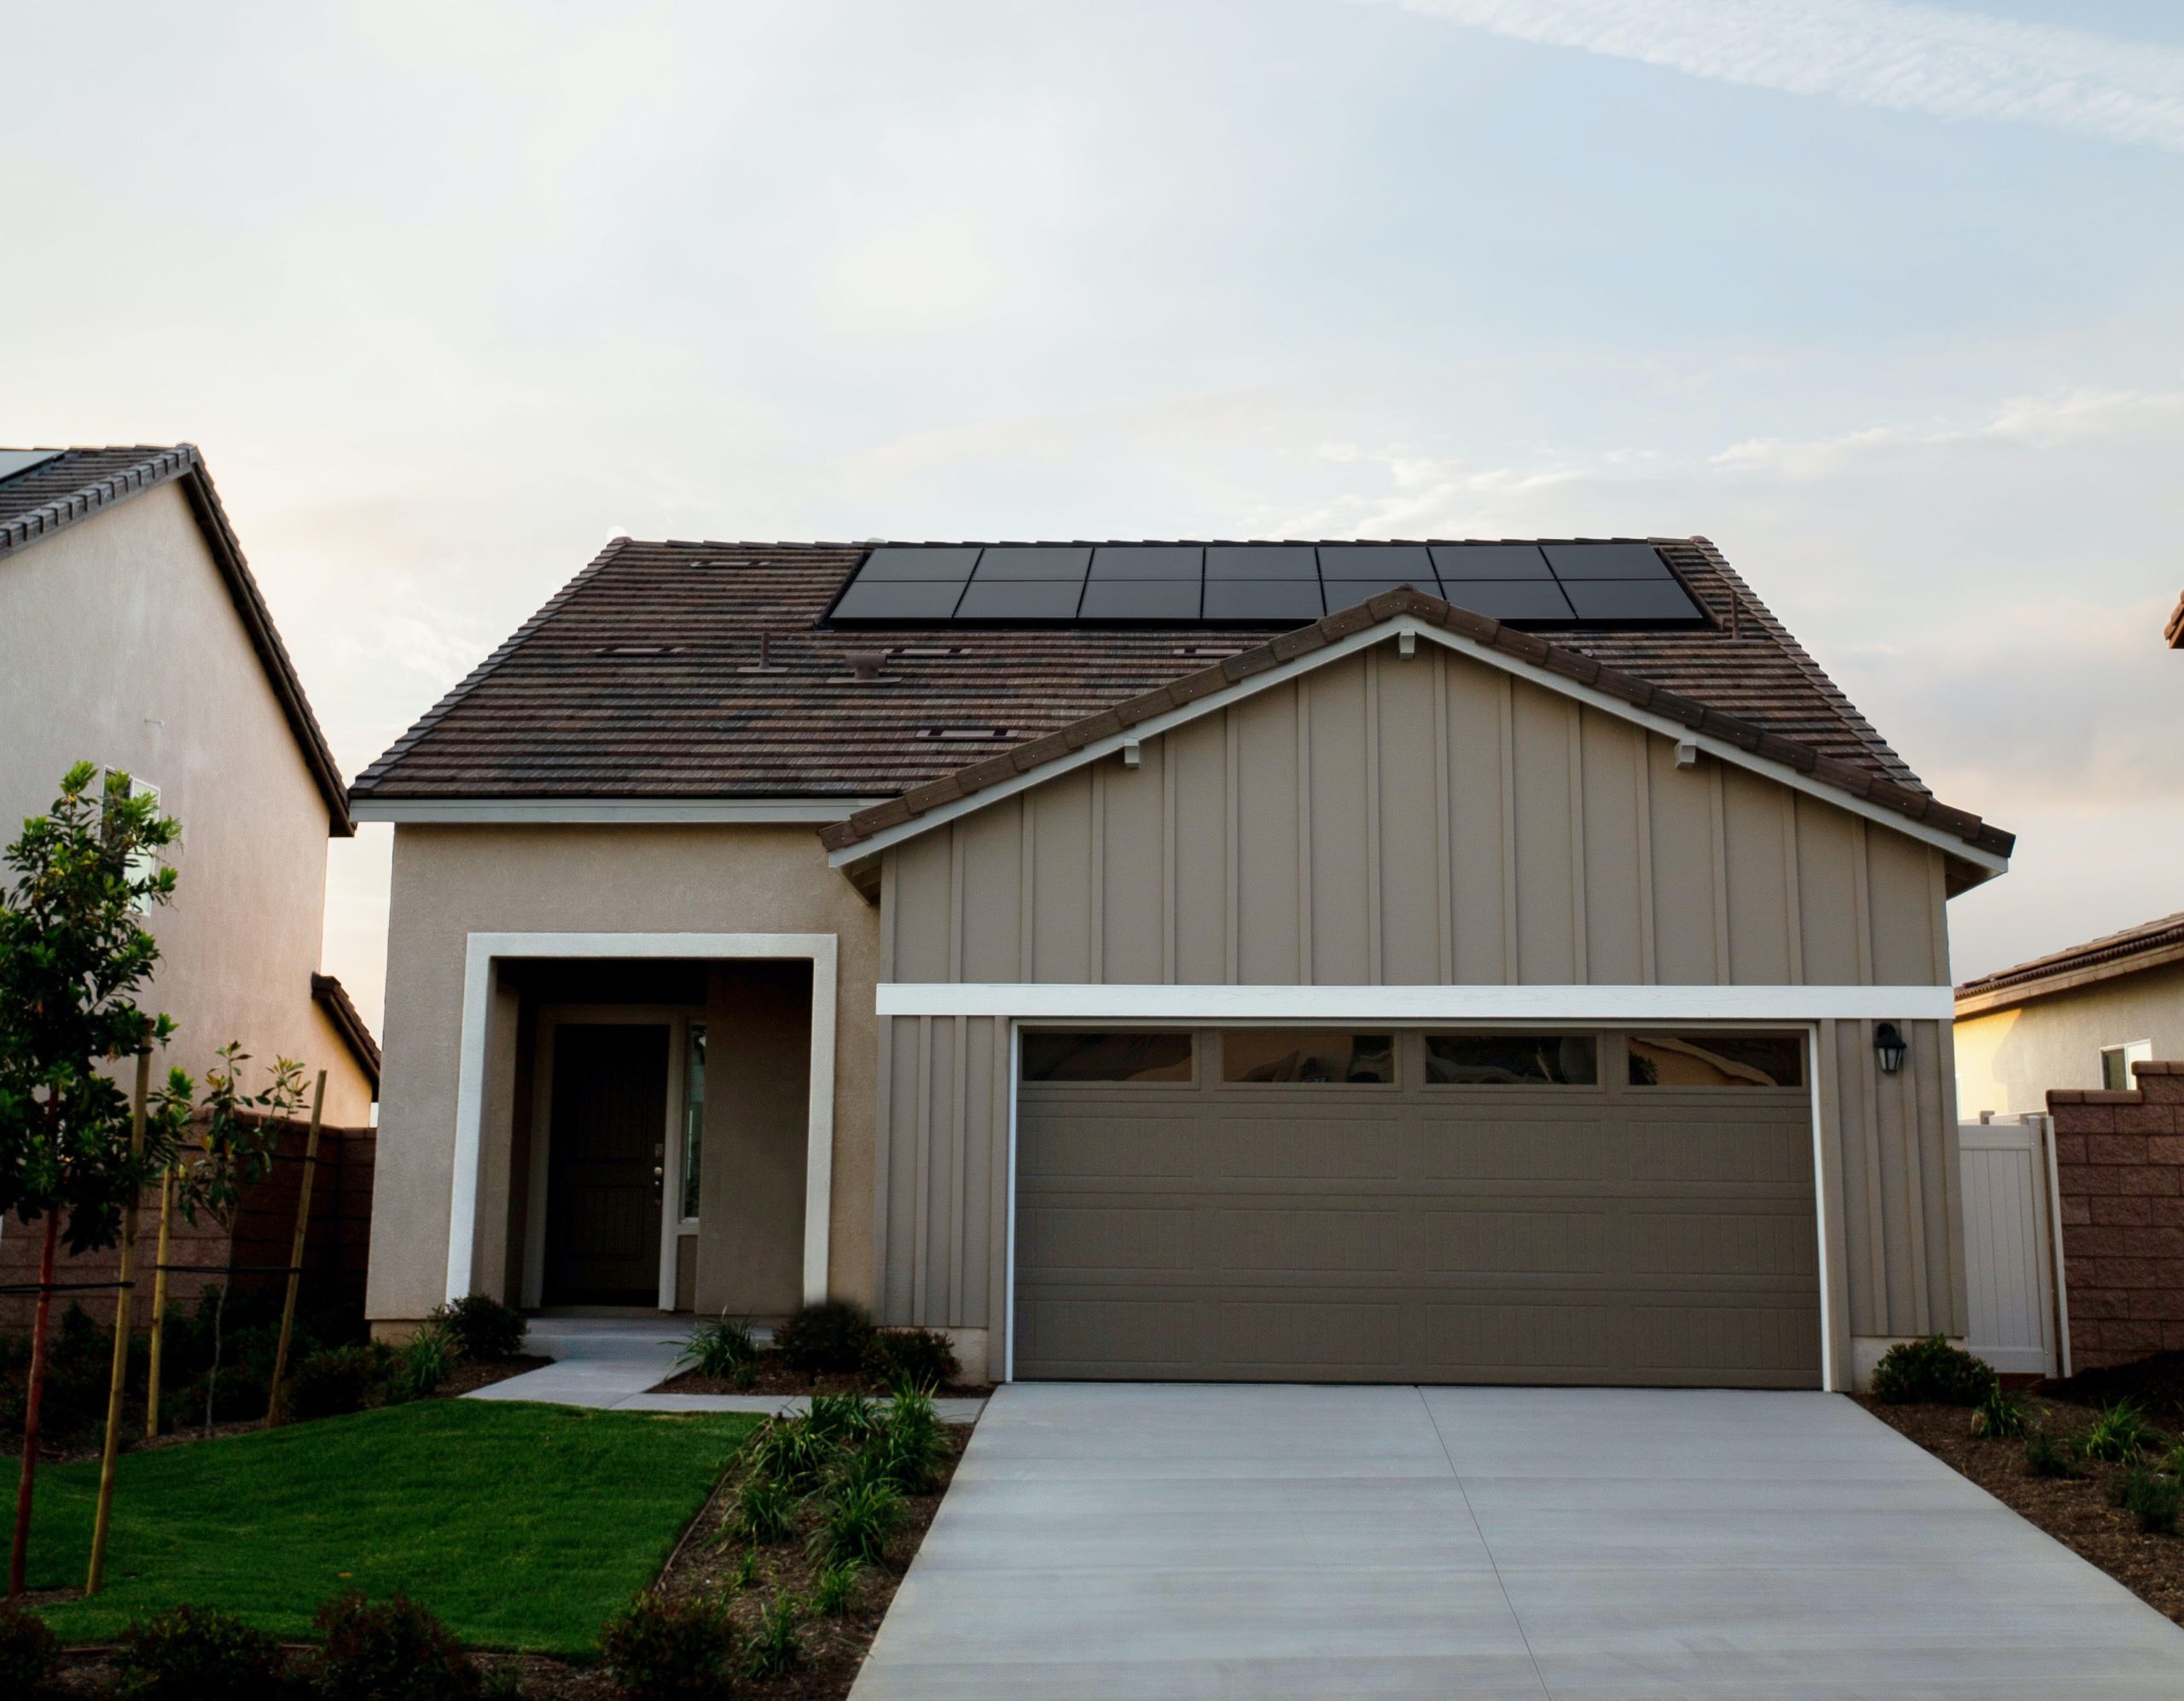 California Energy Leader, Solar Optimum, Now Offers Solar Systems and Battery Storage in Nevada